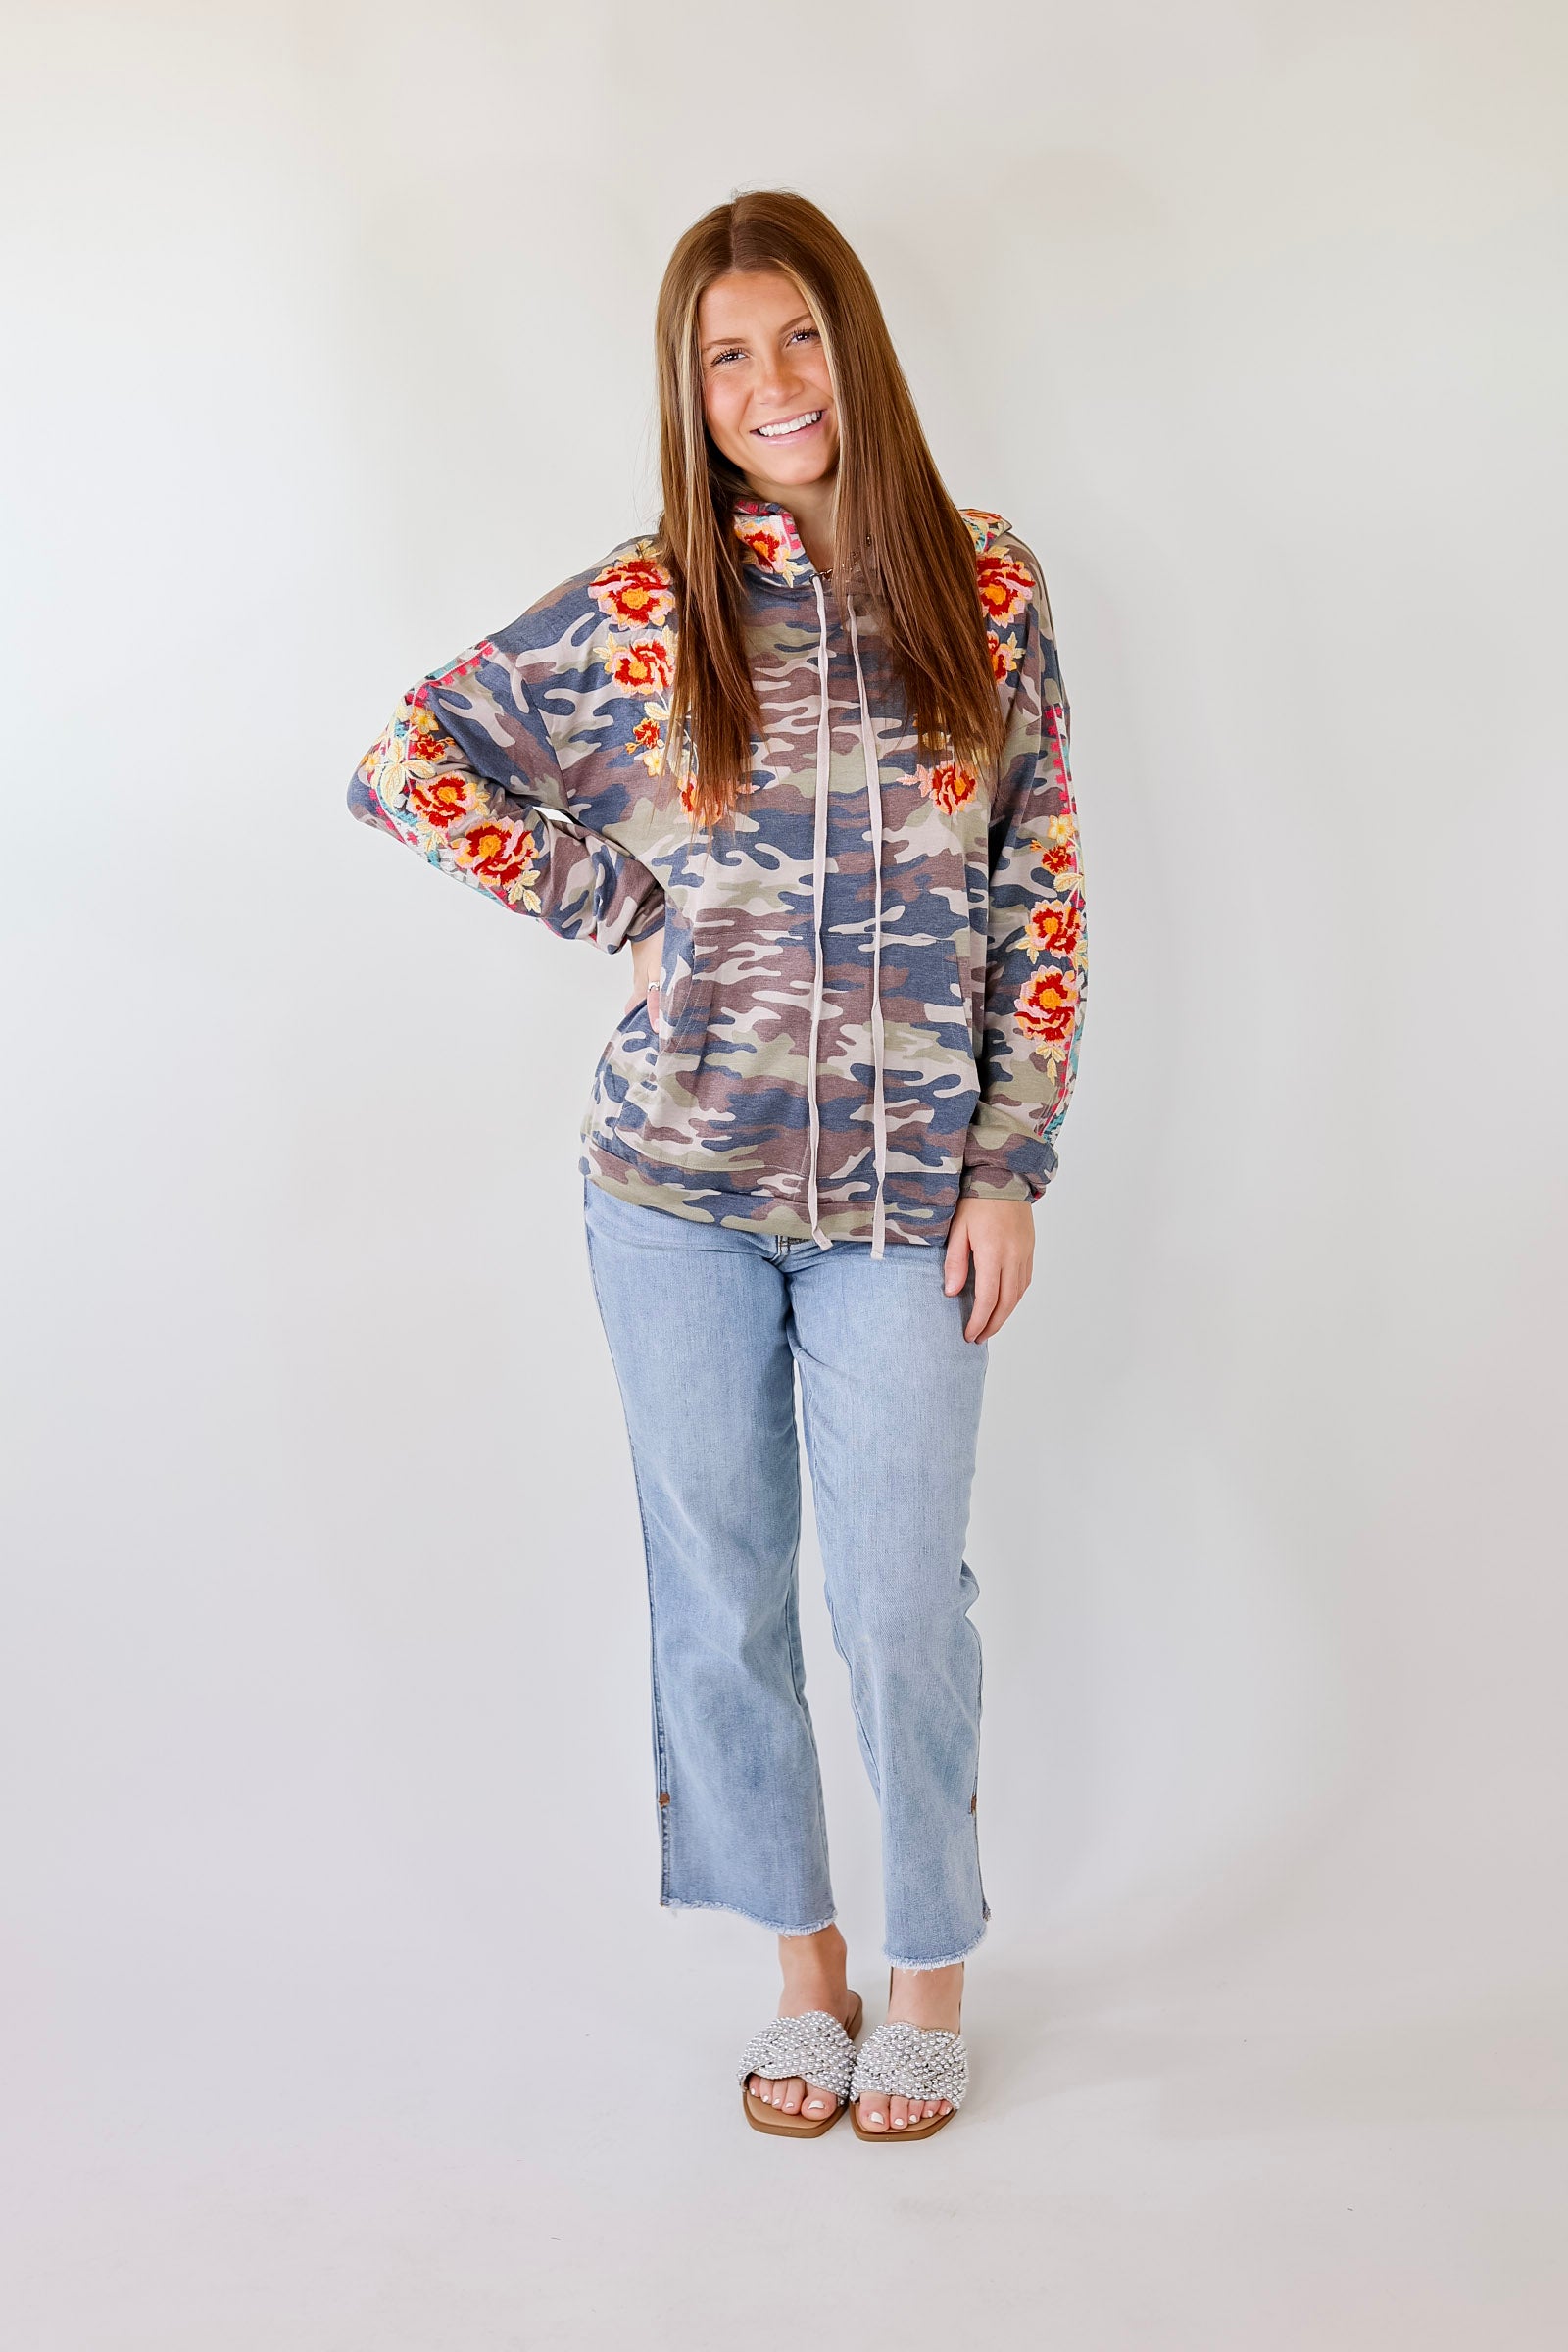 Grace and Bliss Embroidered Pullover Hoodie with Black Velvet Back in Camouflage - Giddy Up Glamour Boutique